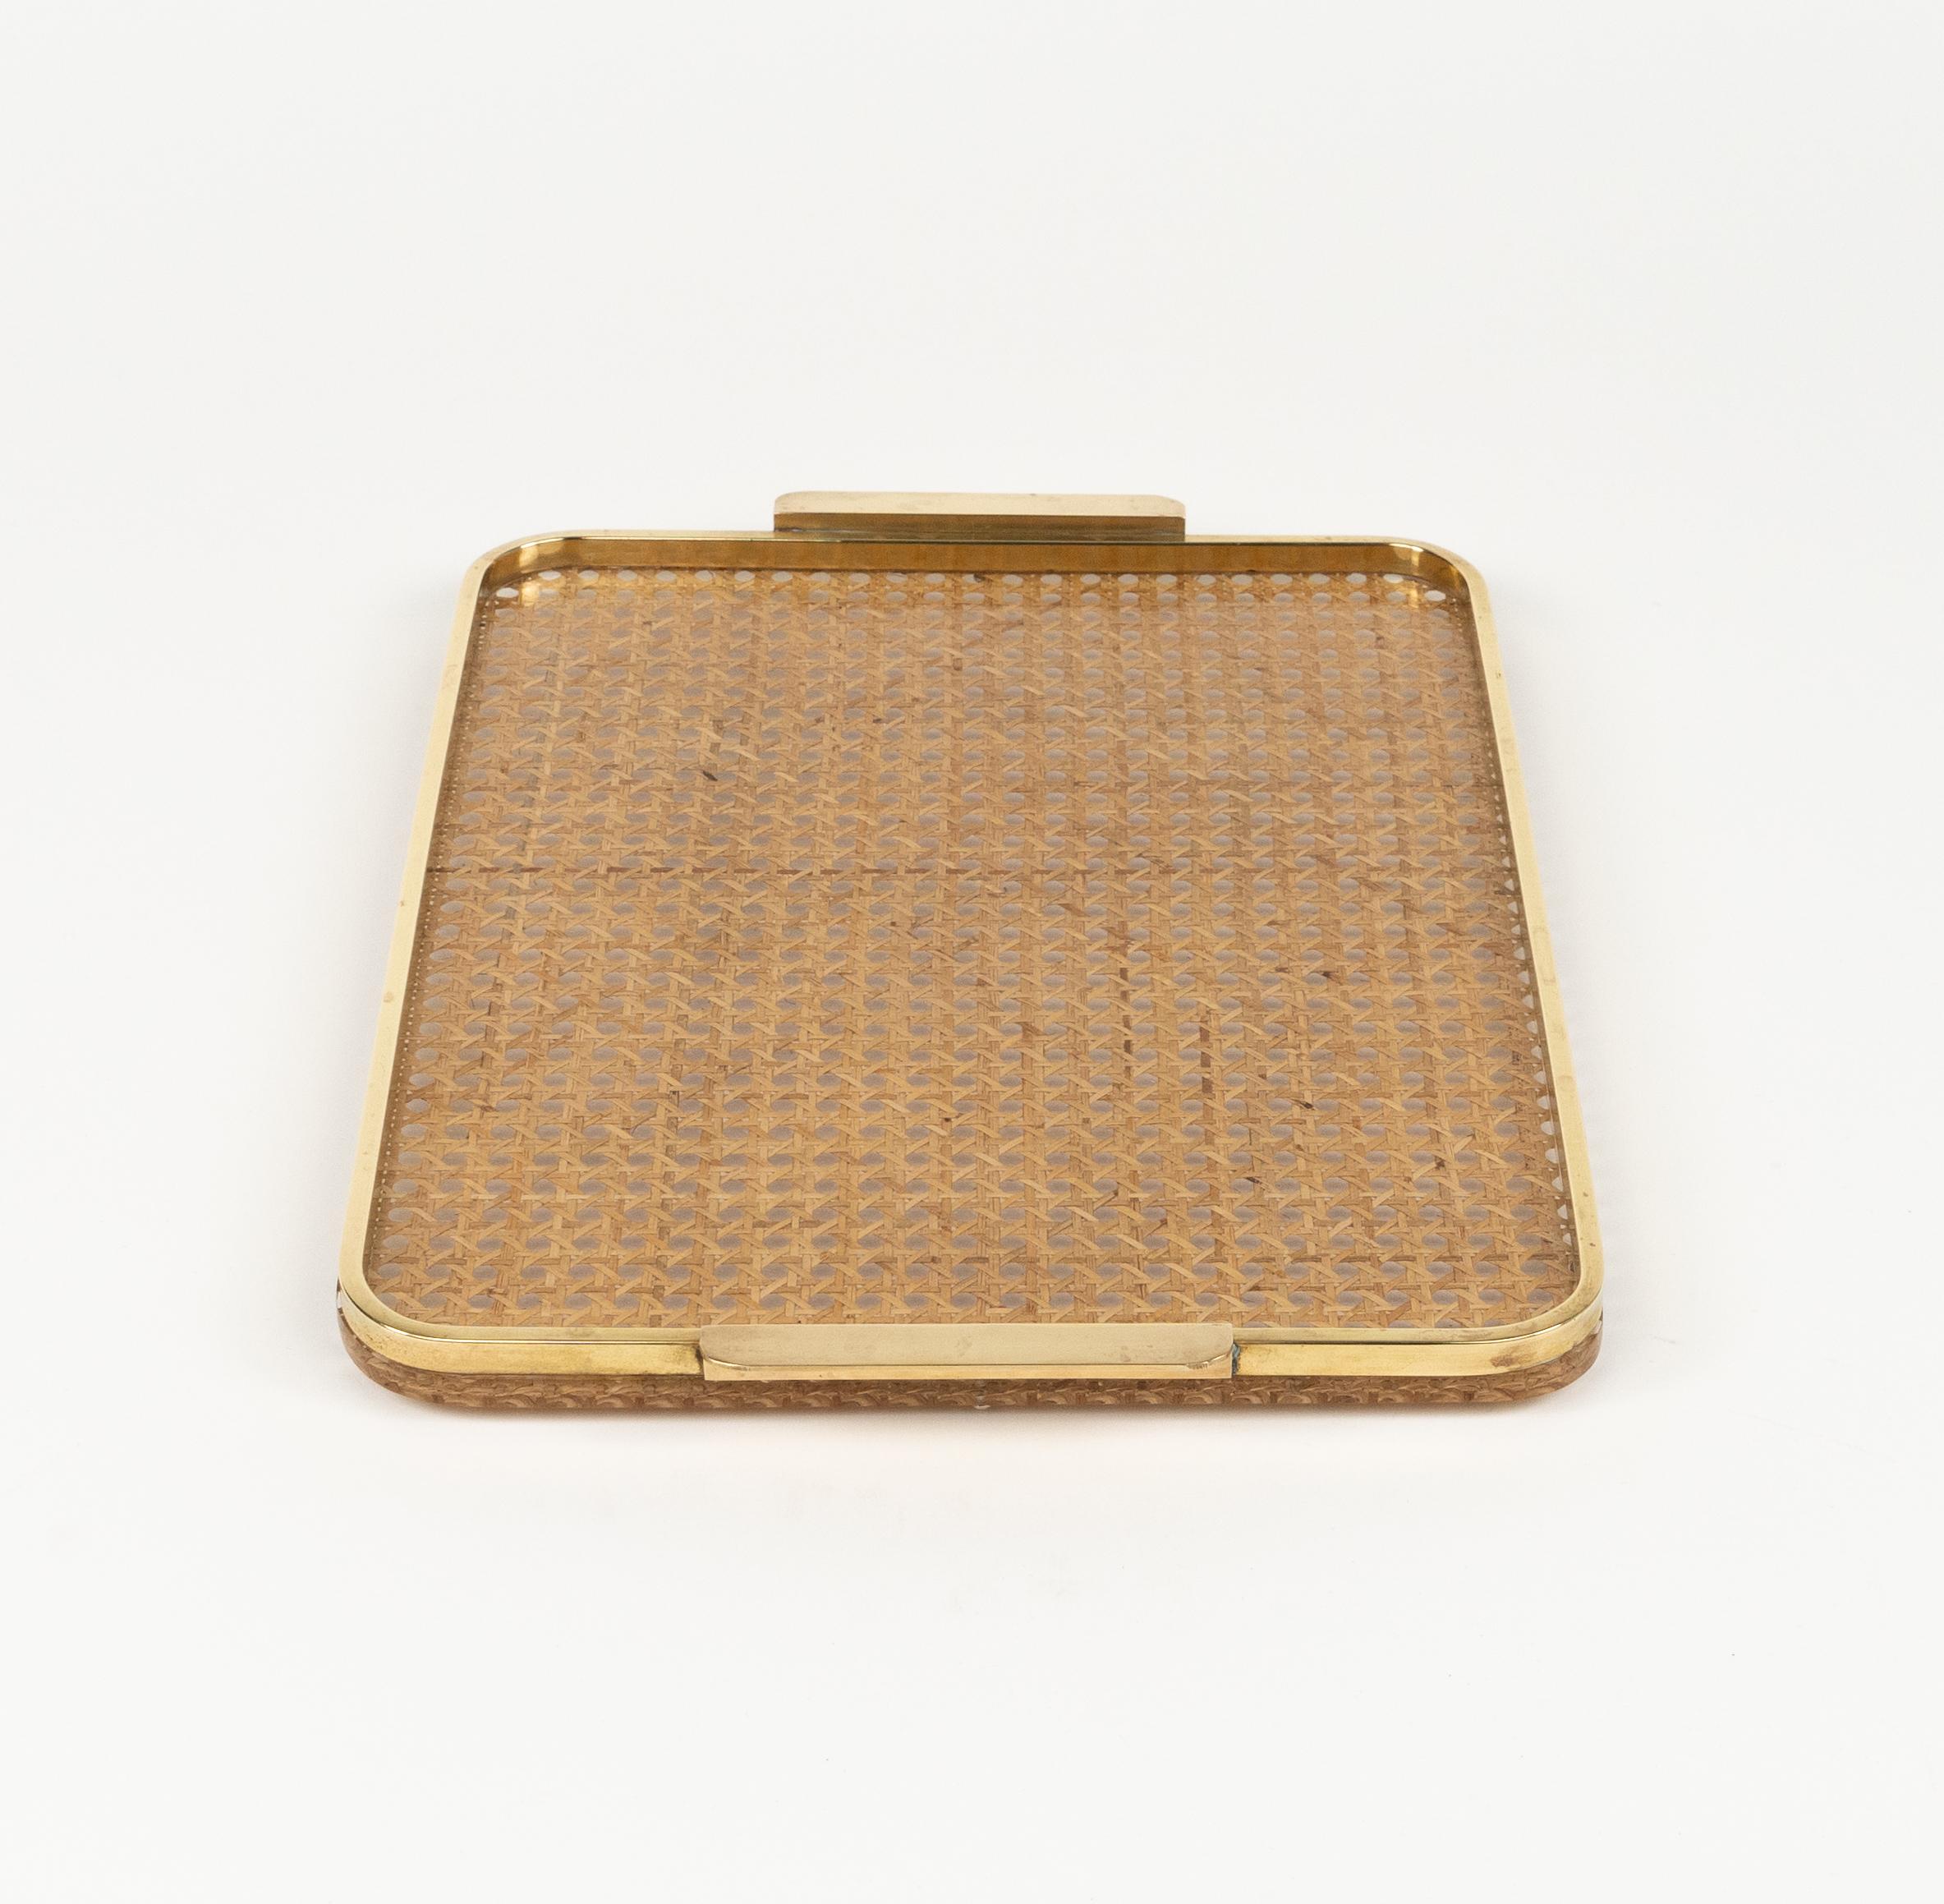 Serving Tray in Lucite, Rattan and Brass Christian Dior Style, Italy, 1970s For Sale 8